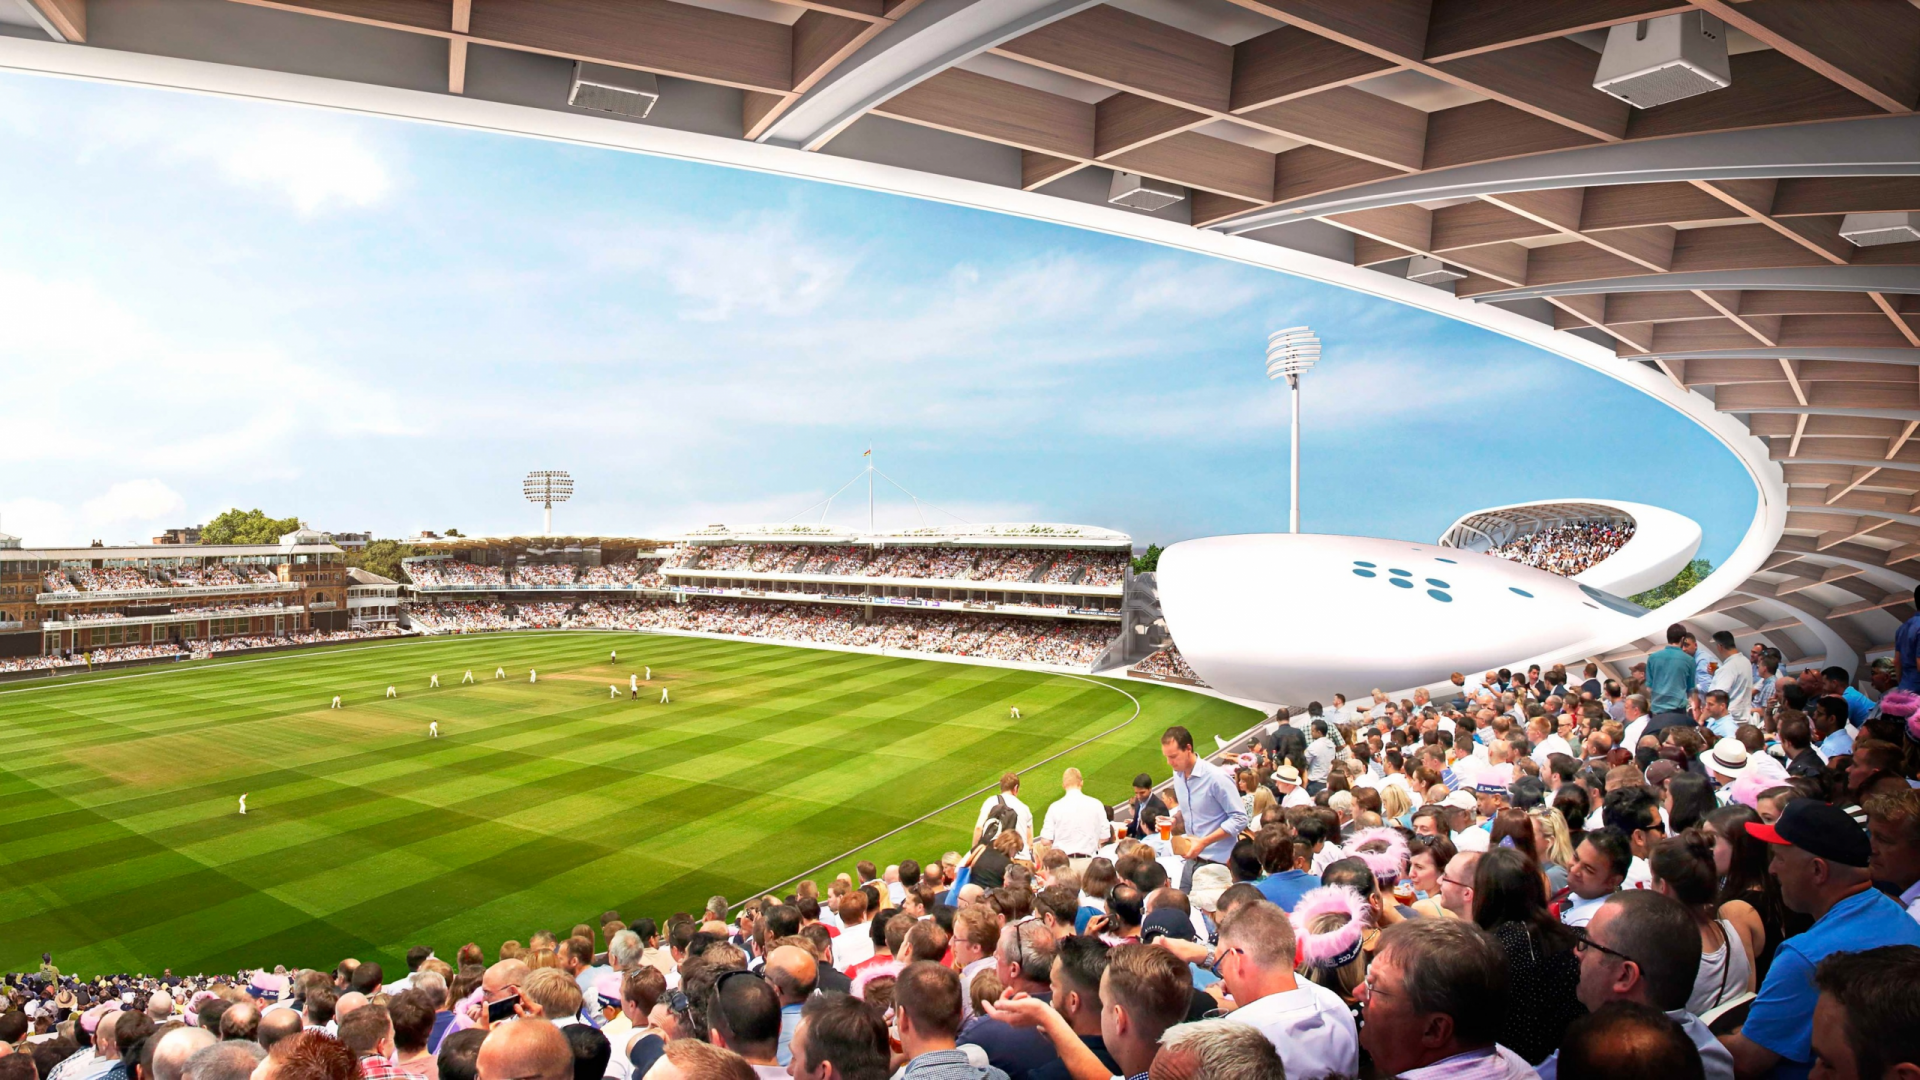 The Design Of Cricket: Building A Global Community